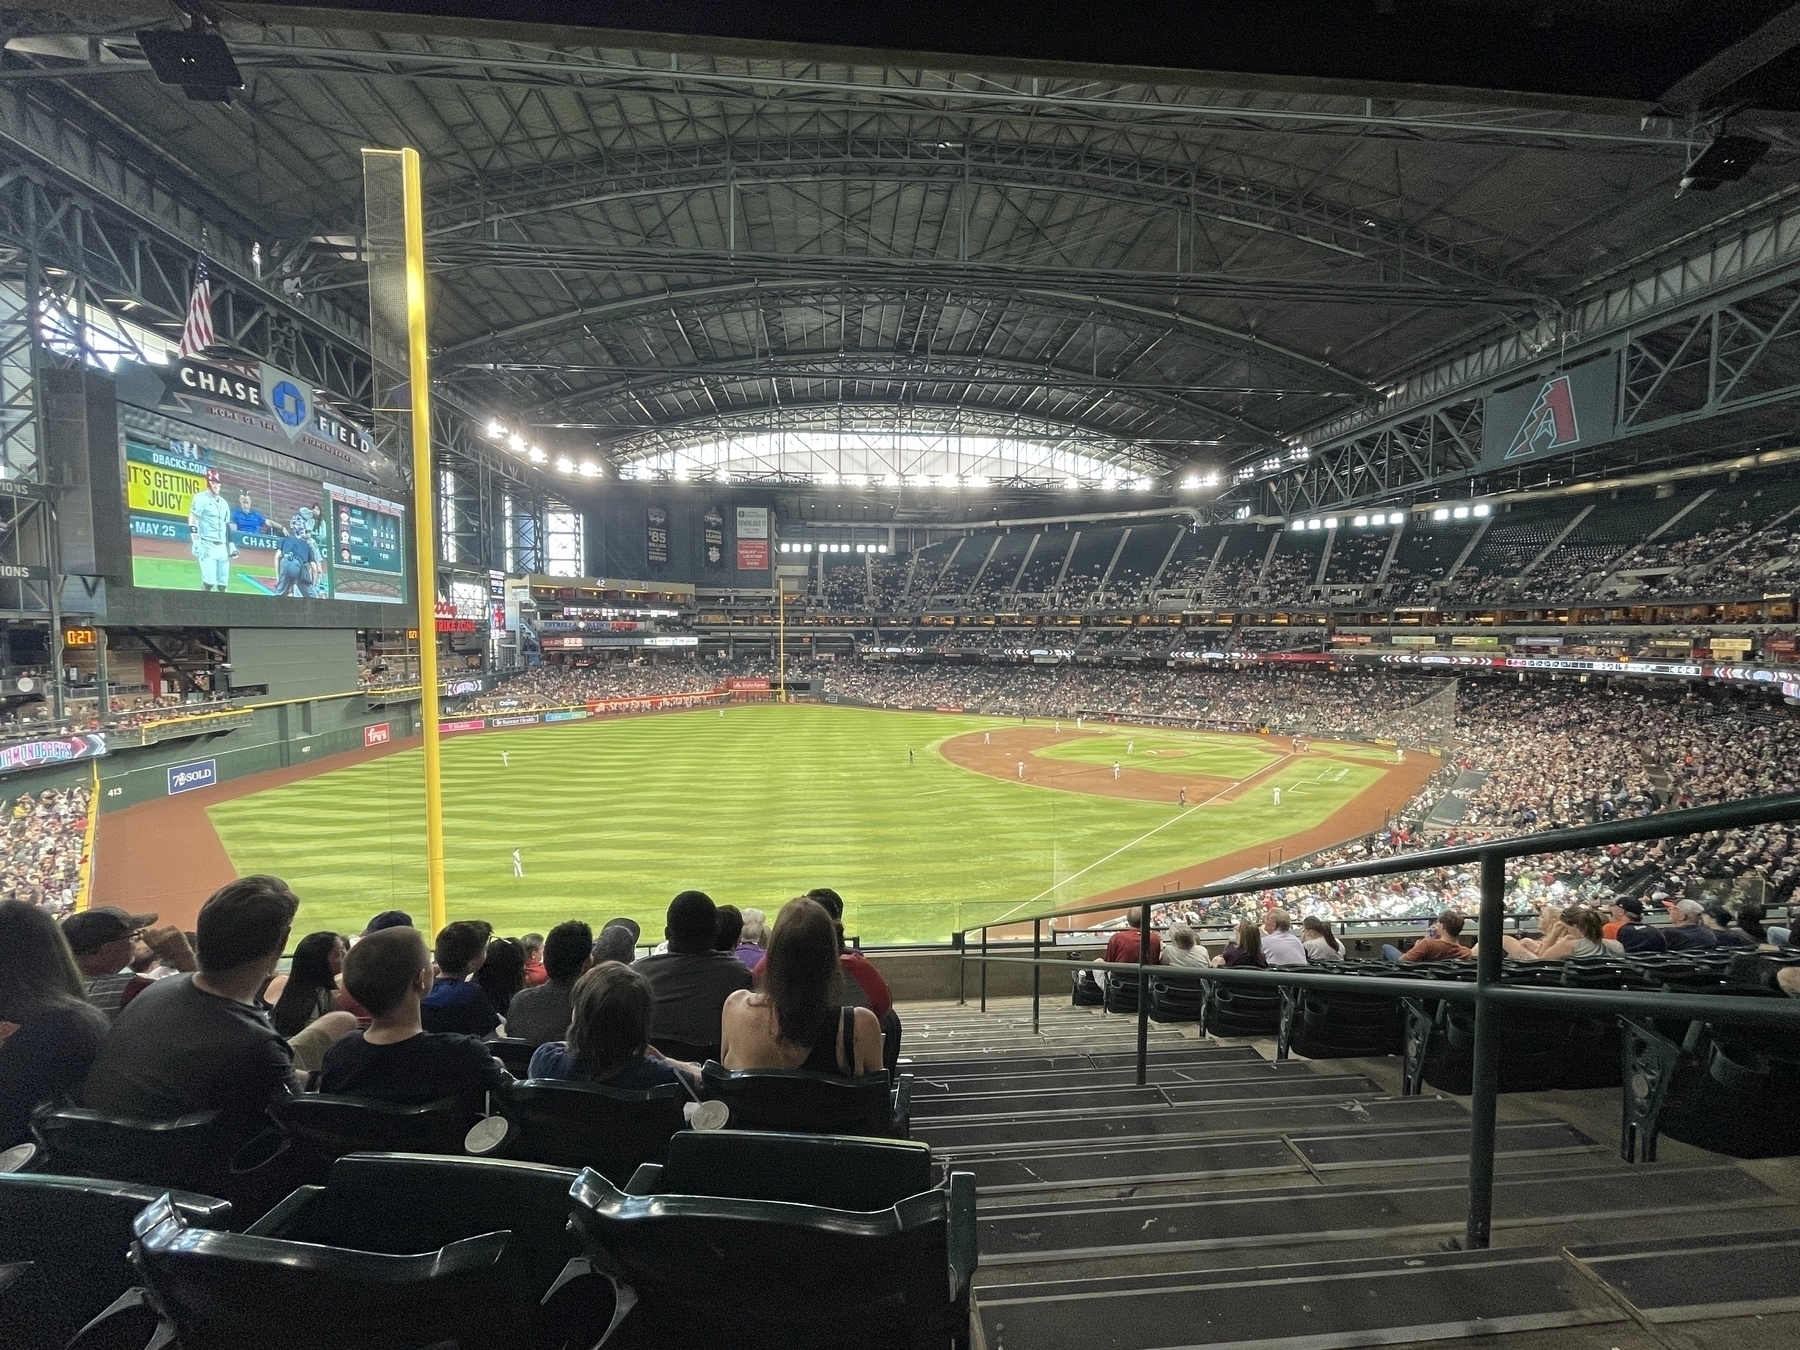 Wide angle photograph of Chase Field, a baseball park.